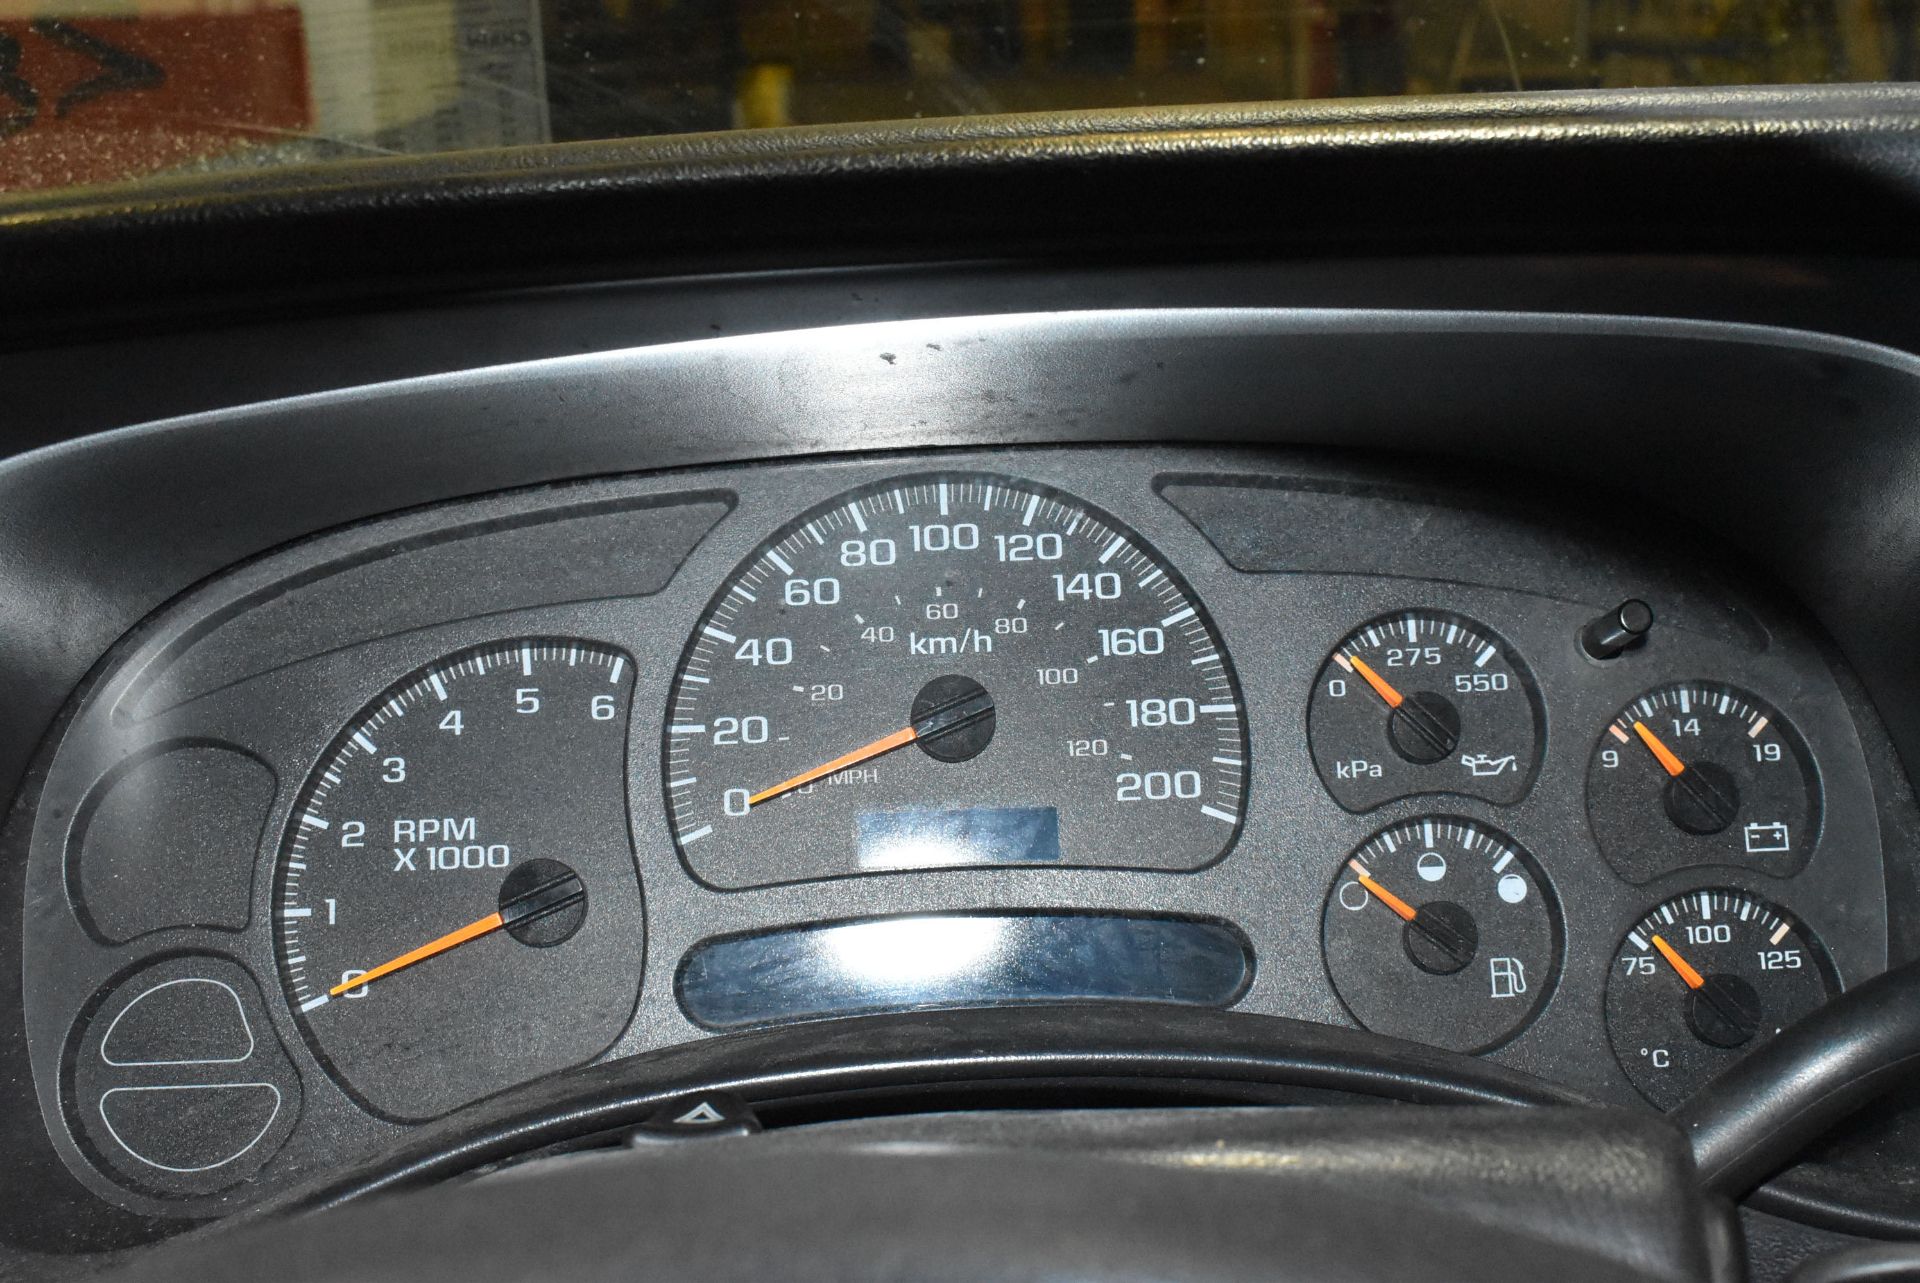 CHEVROLET (2003) SILVERADO 1500 PICKUP TRUCK WITH 4.3L 6 CYL. GAS ENGINE, AUTOMATIC TRANSMISSION, - Image 8 of 12